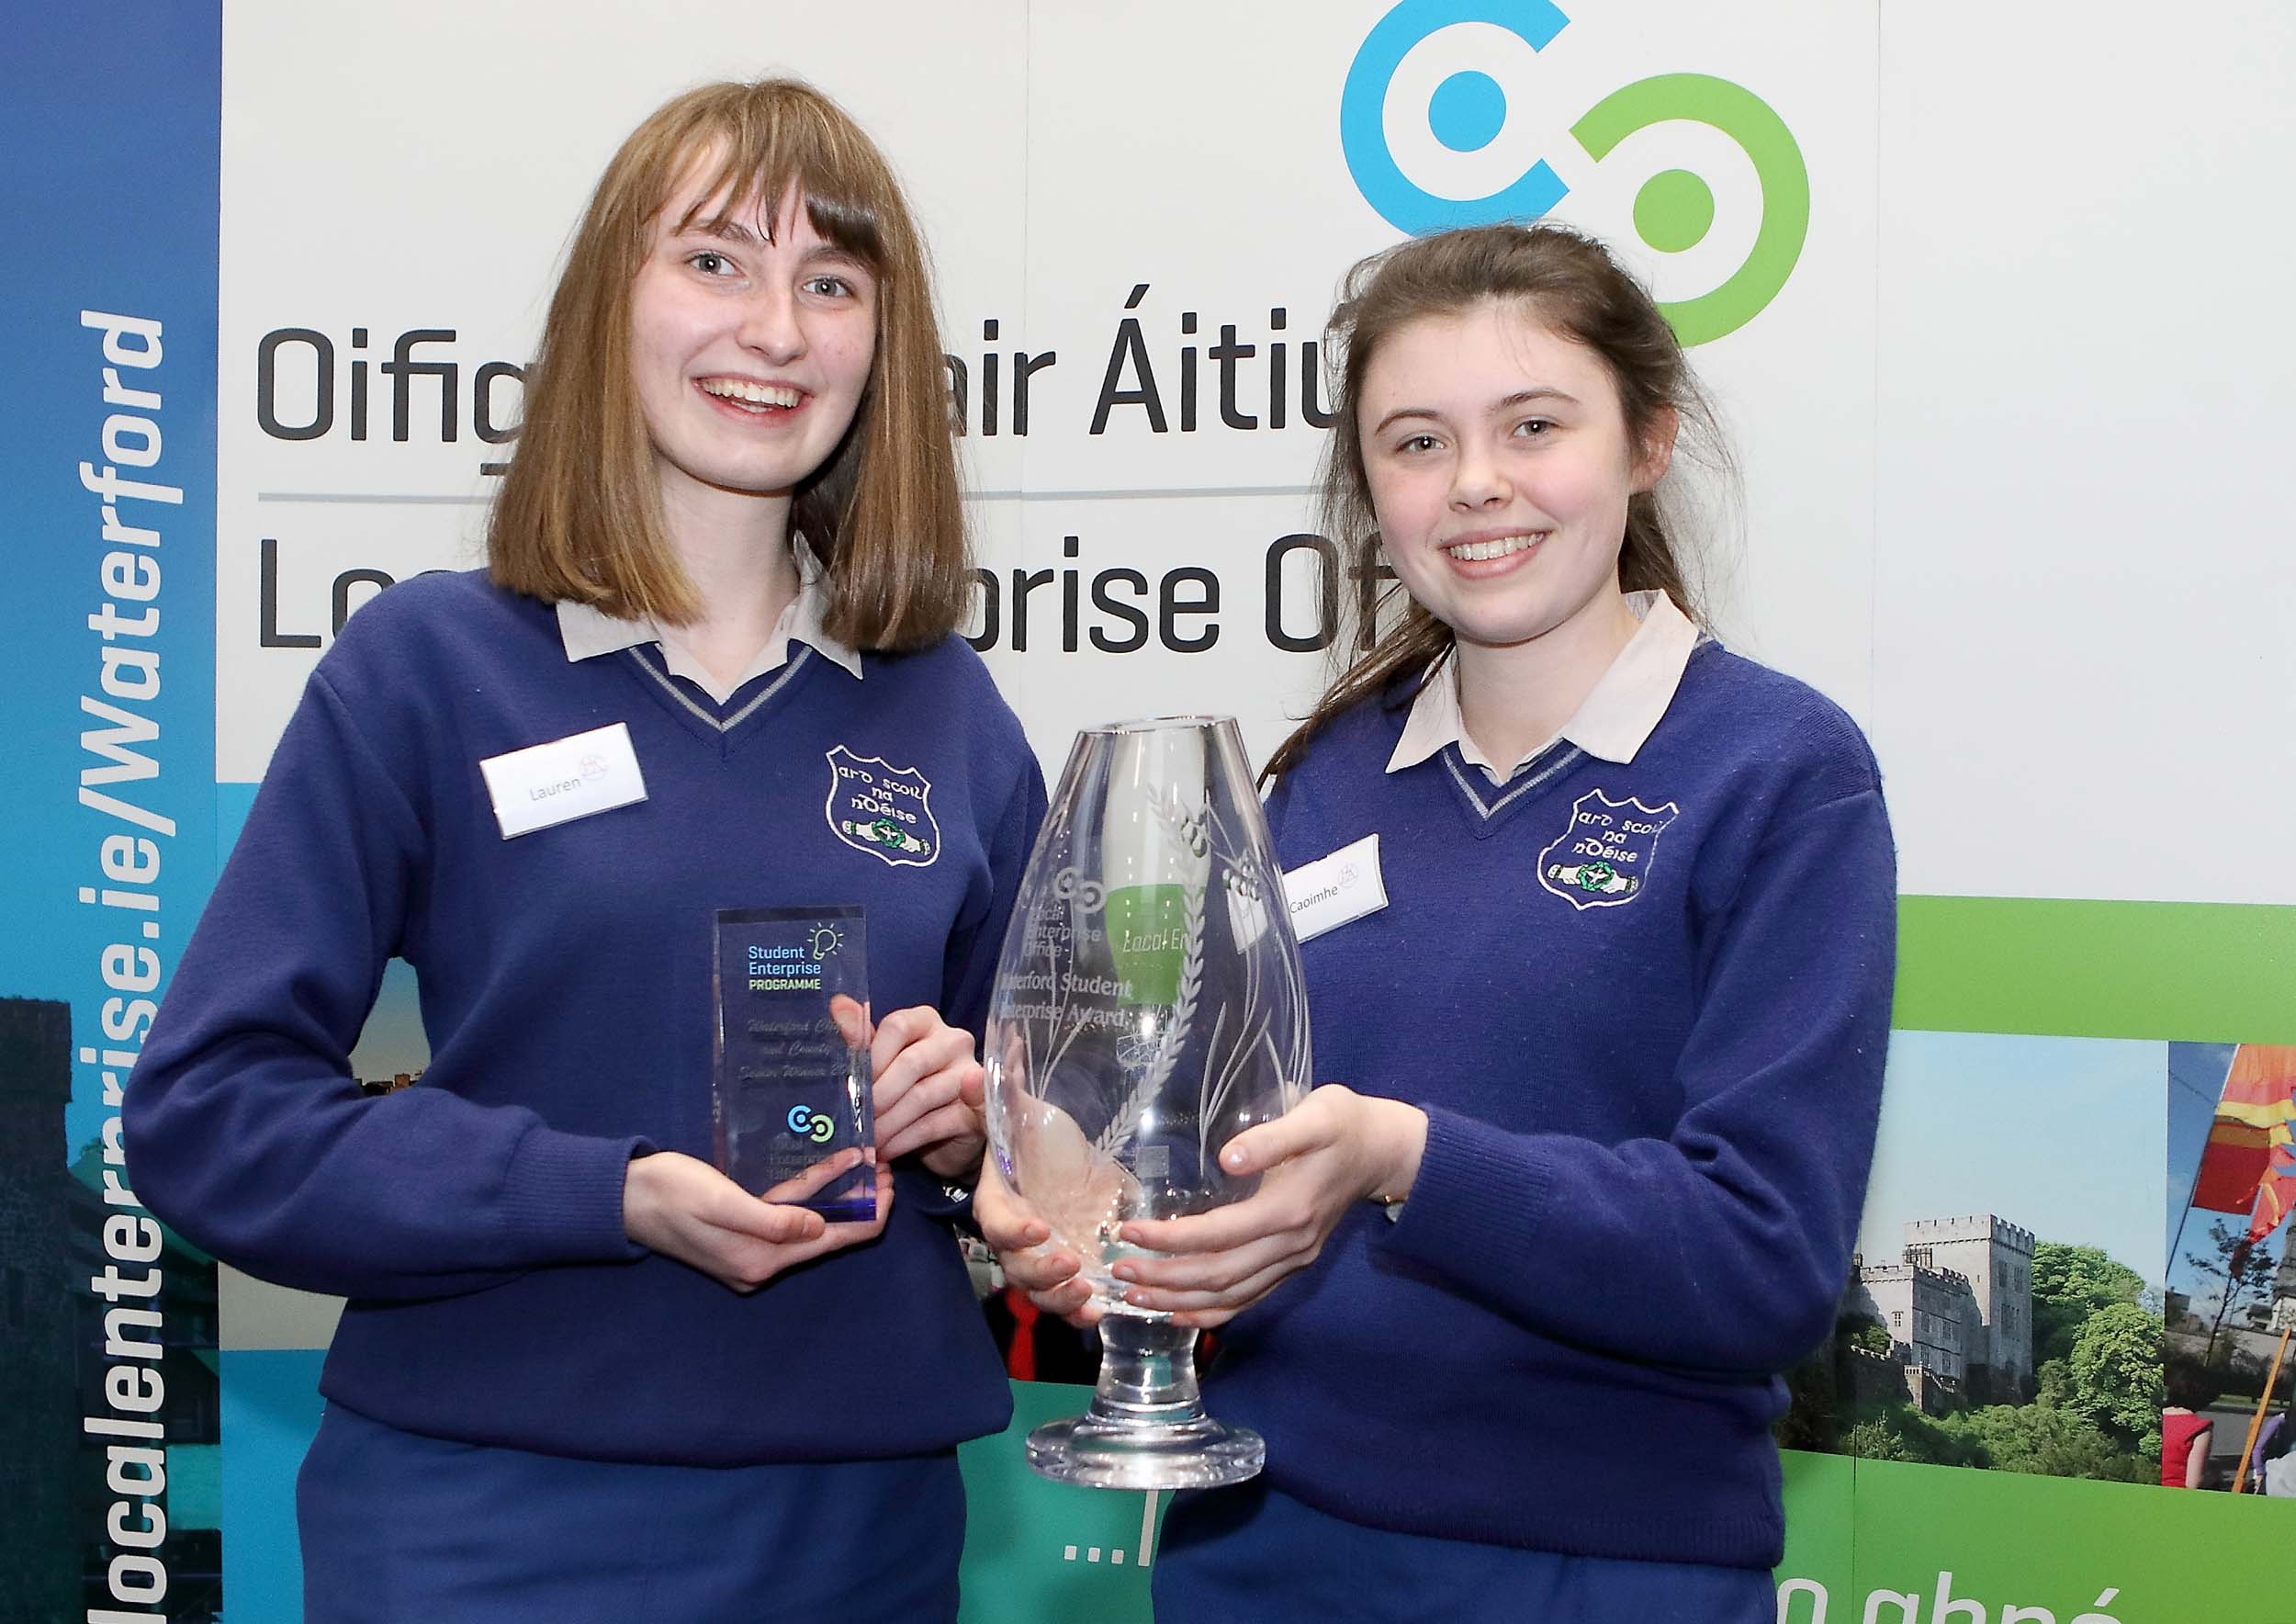 Waterford students to shine at Student Enterprise Awards